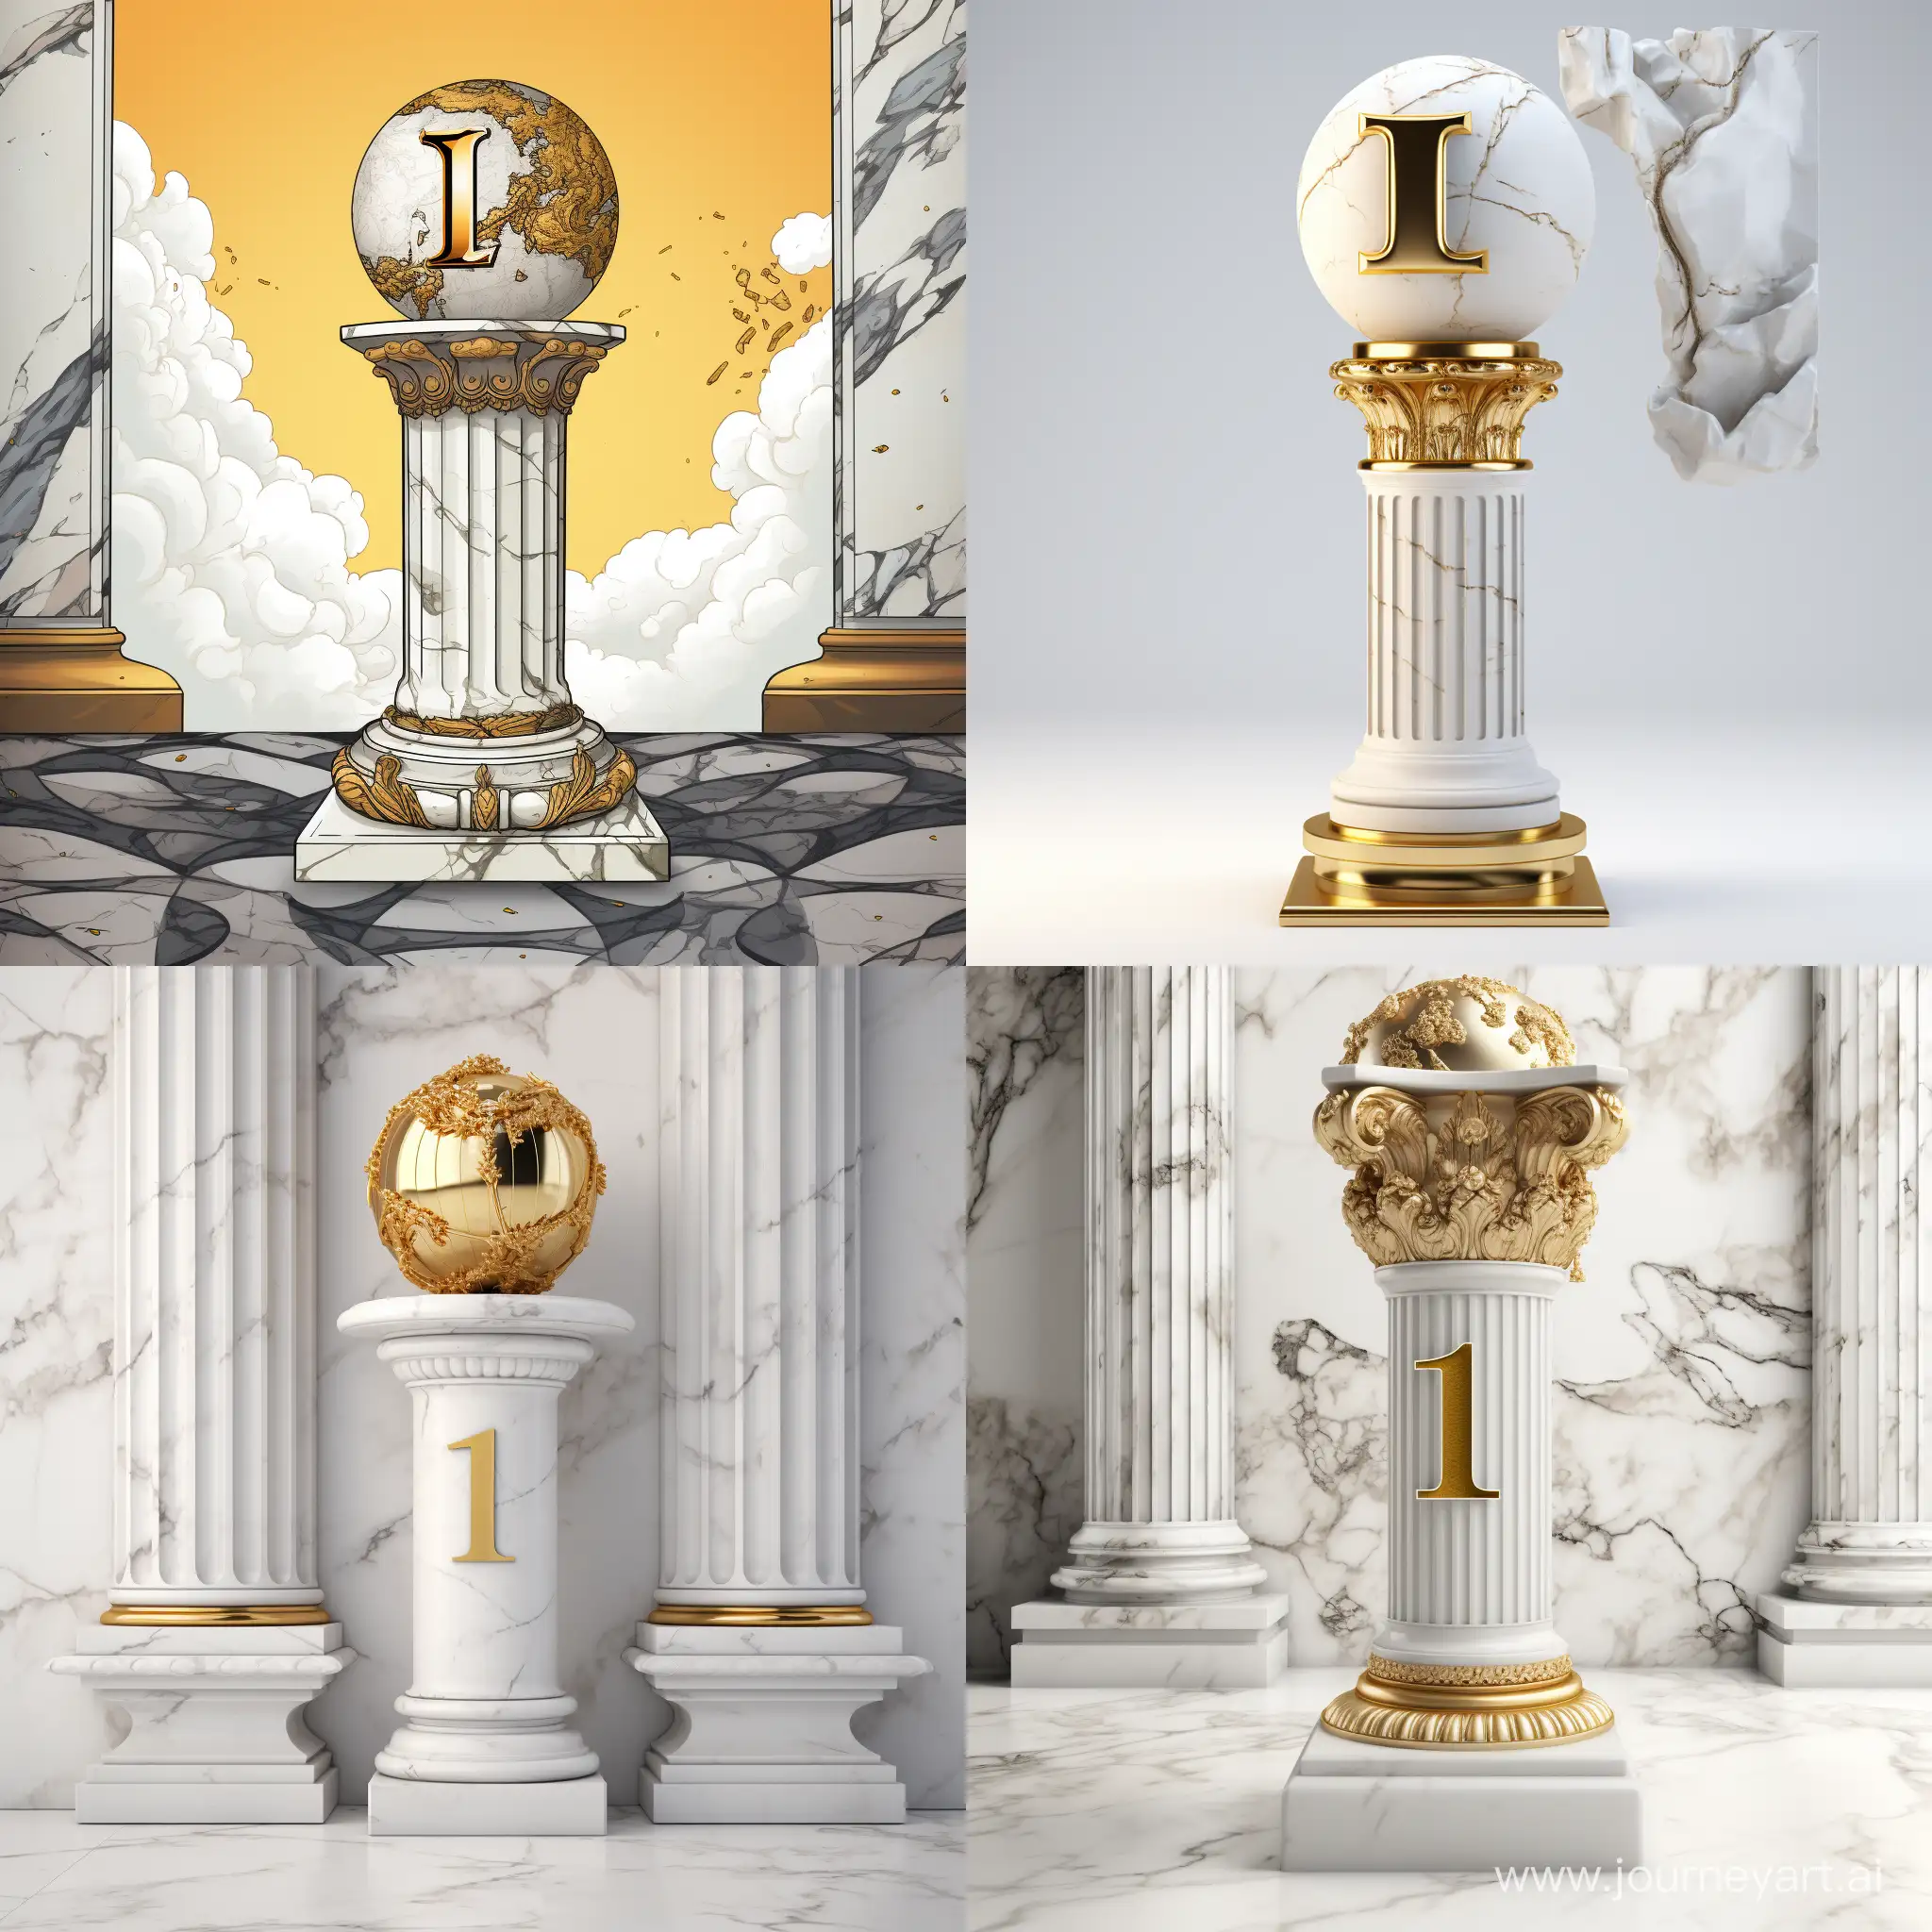 A white marble pillar with a golden globe at the top that forms the letter i in a comic style